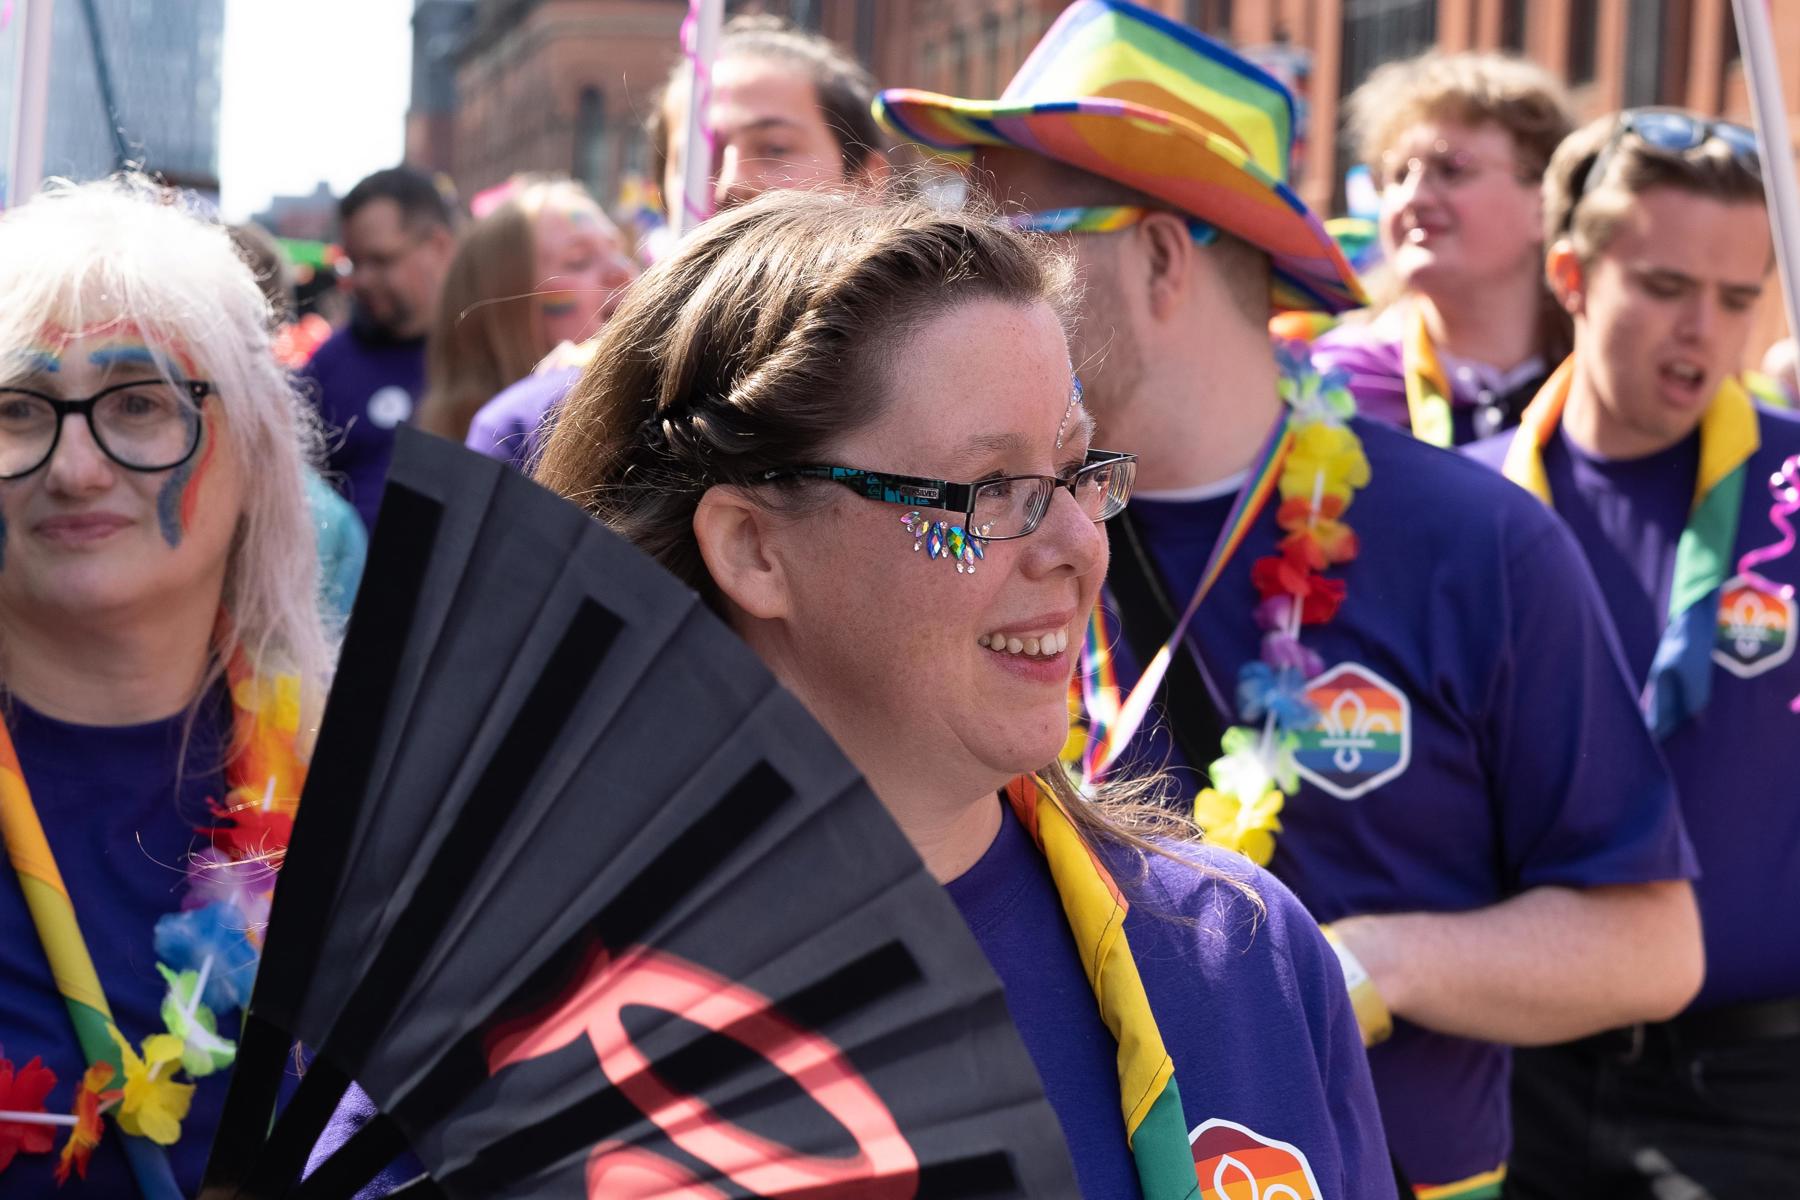 Katherine, a member of Scouts attending Pride and taking part in a pride parade